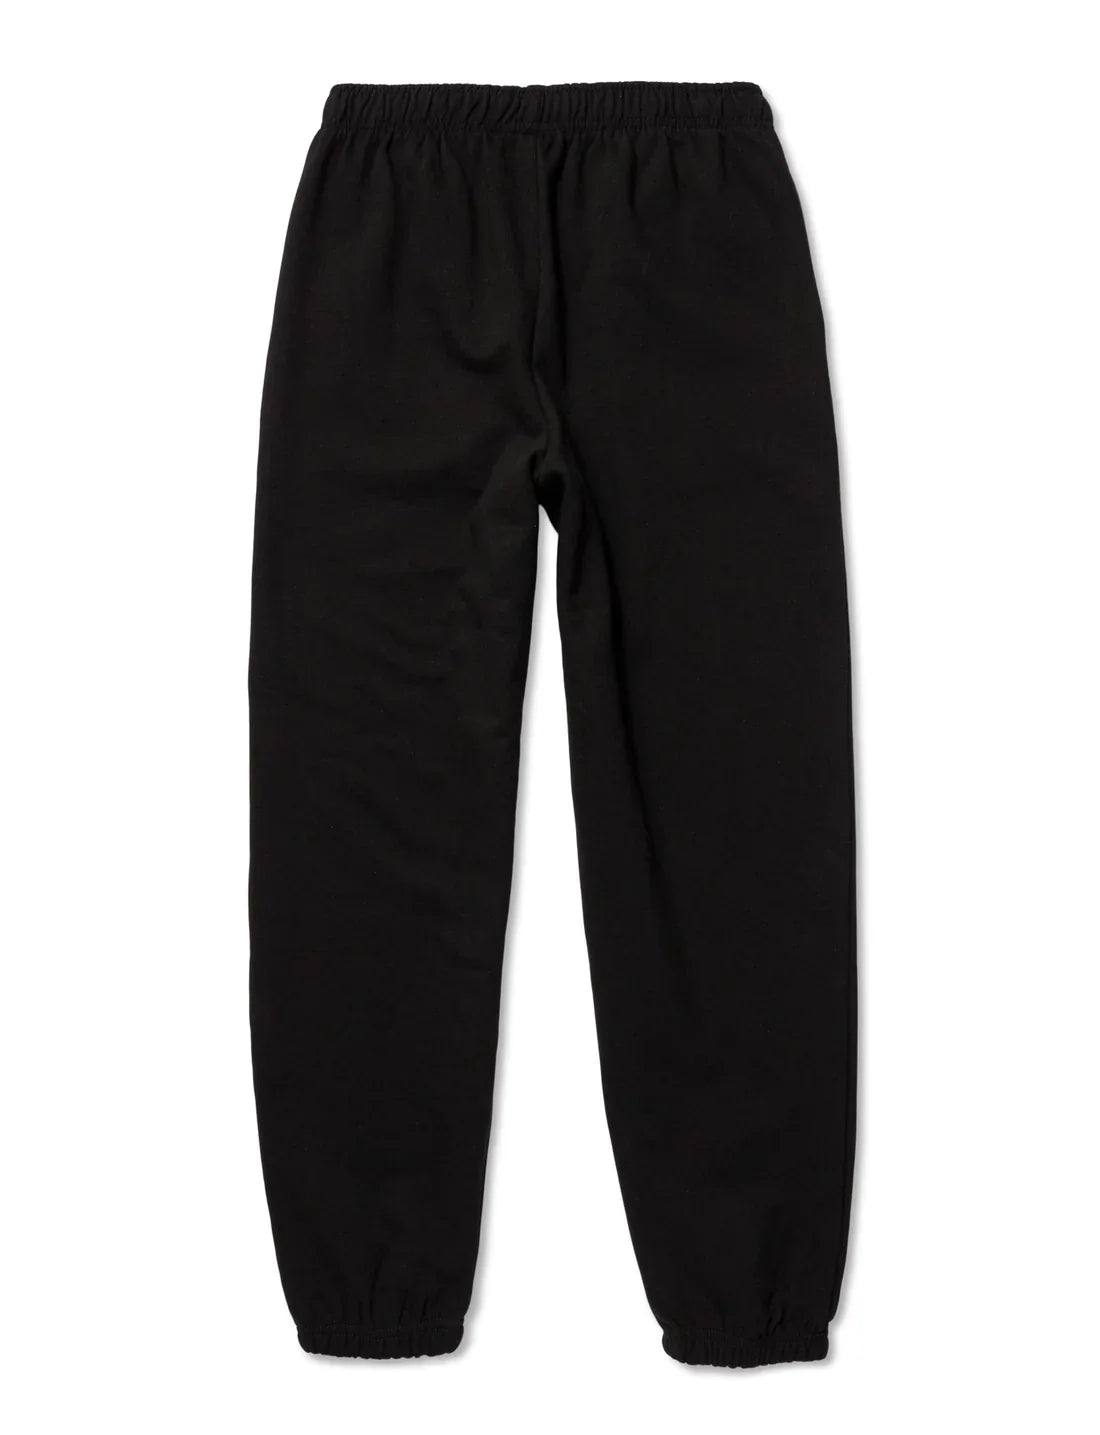 Back side of the Black Walkerverse 2.0 Sweatpants, showcasing a sleek, uninterrupted black design with a comfortable elastic cuff.